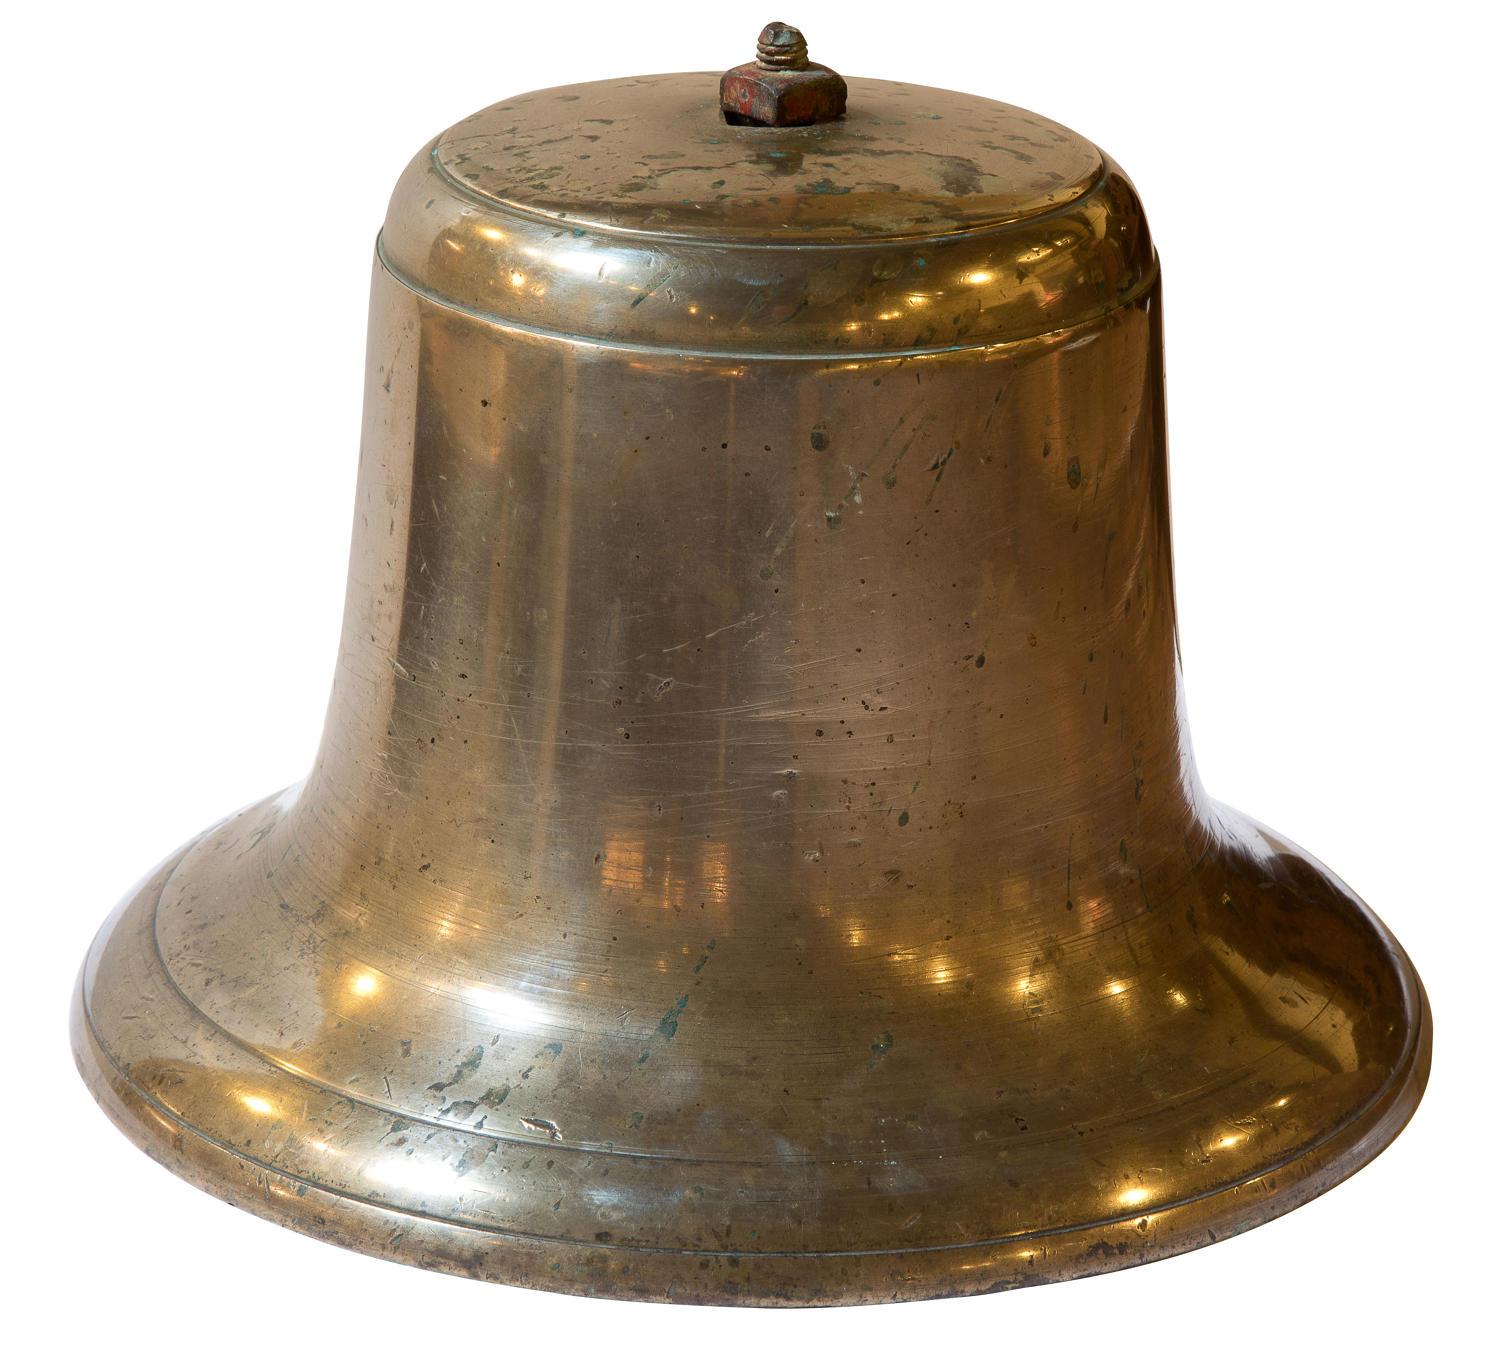 A bronze ships bell from HMS Monarch 1878. A wonderful piece of memorabilia from a historic battleship.